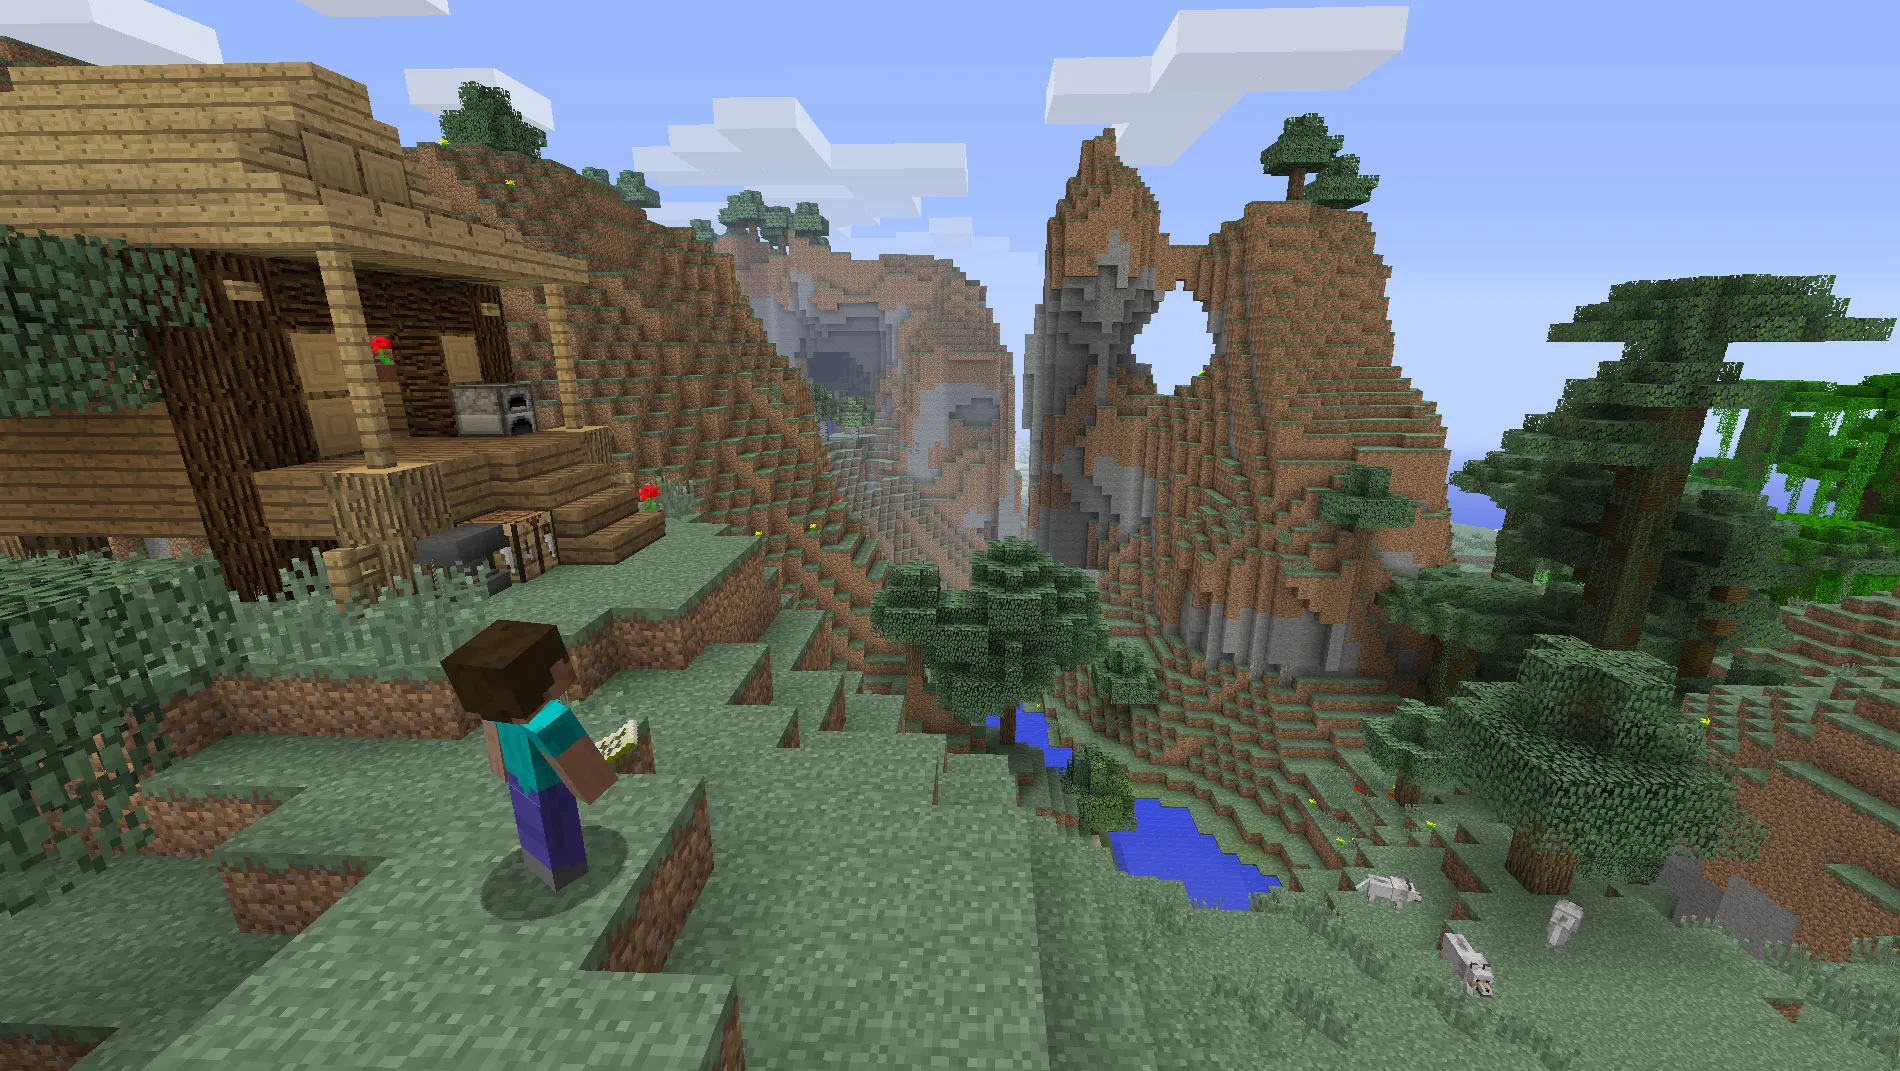 The world of minecraft: have the best server